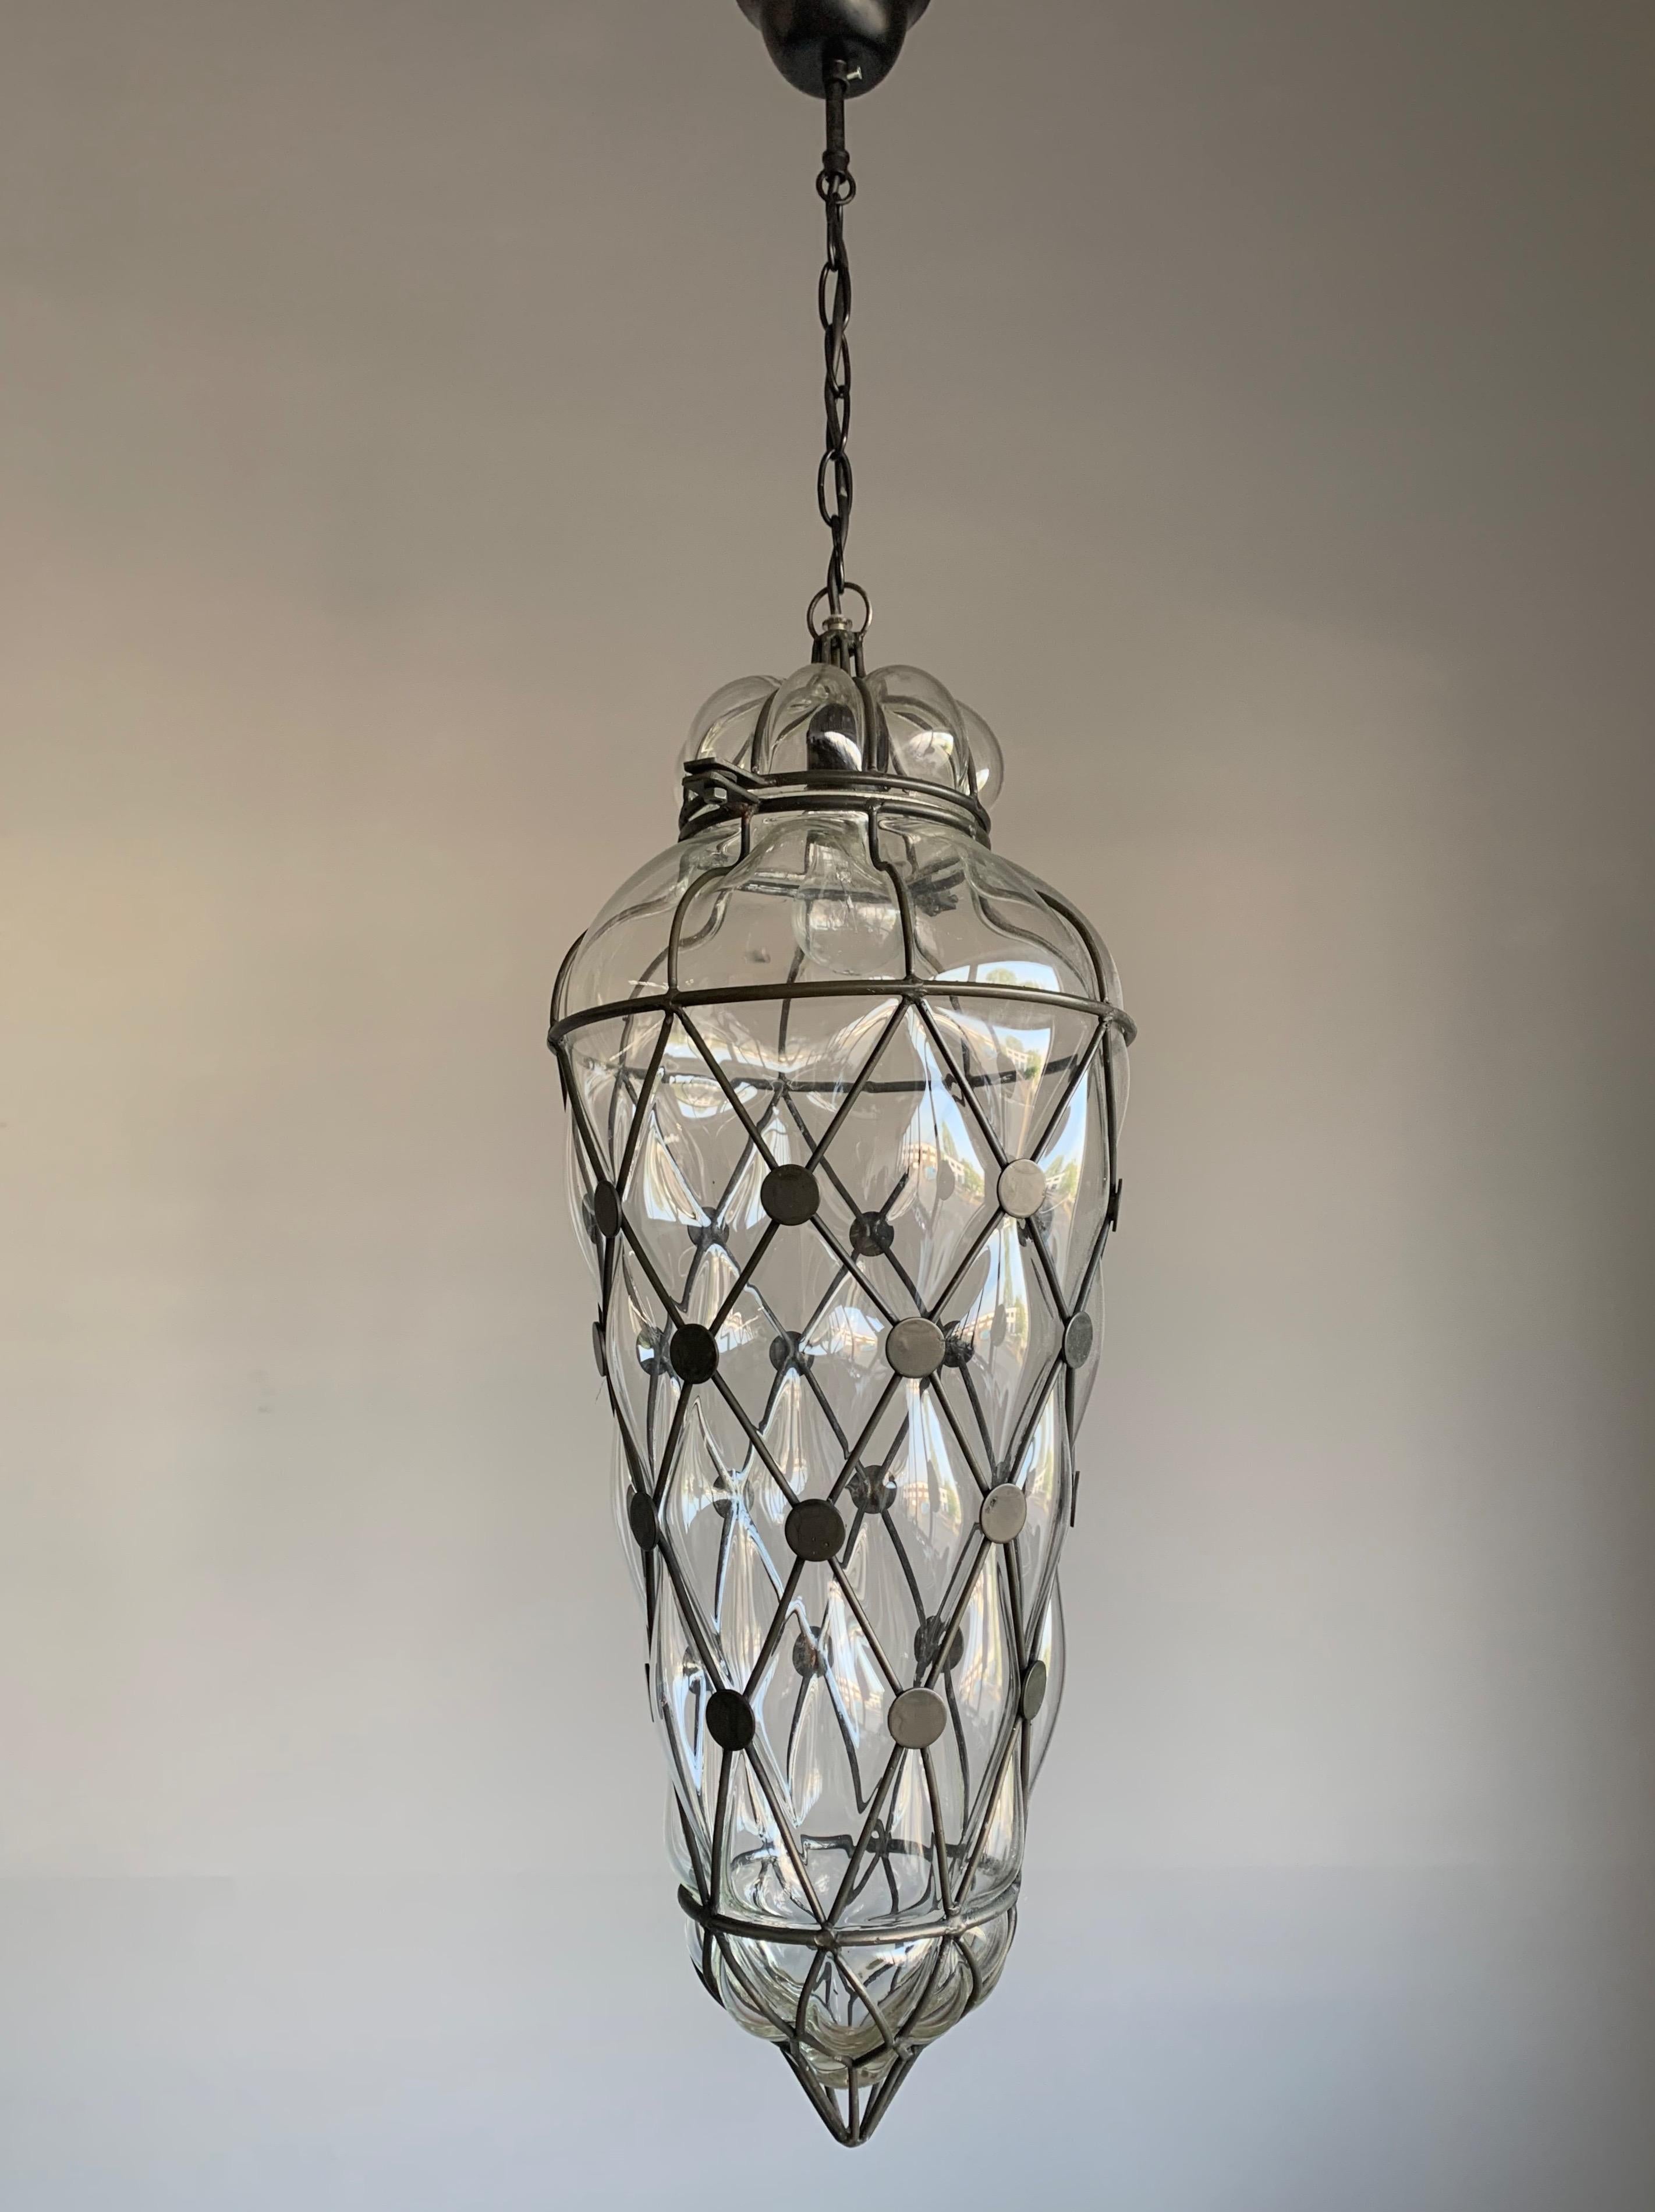 Hand-Crafted Large Venetian Style Mouth  Blown, Glass in Metal Frame Pendant Light / Fixture